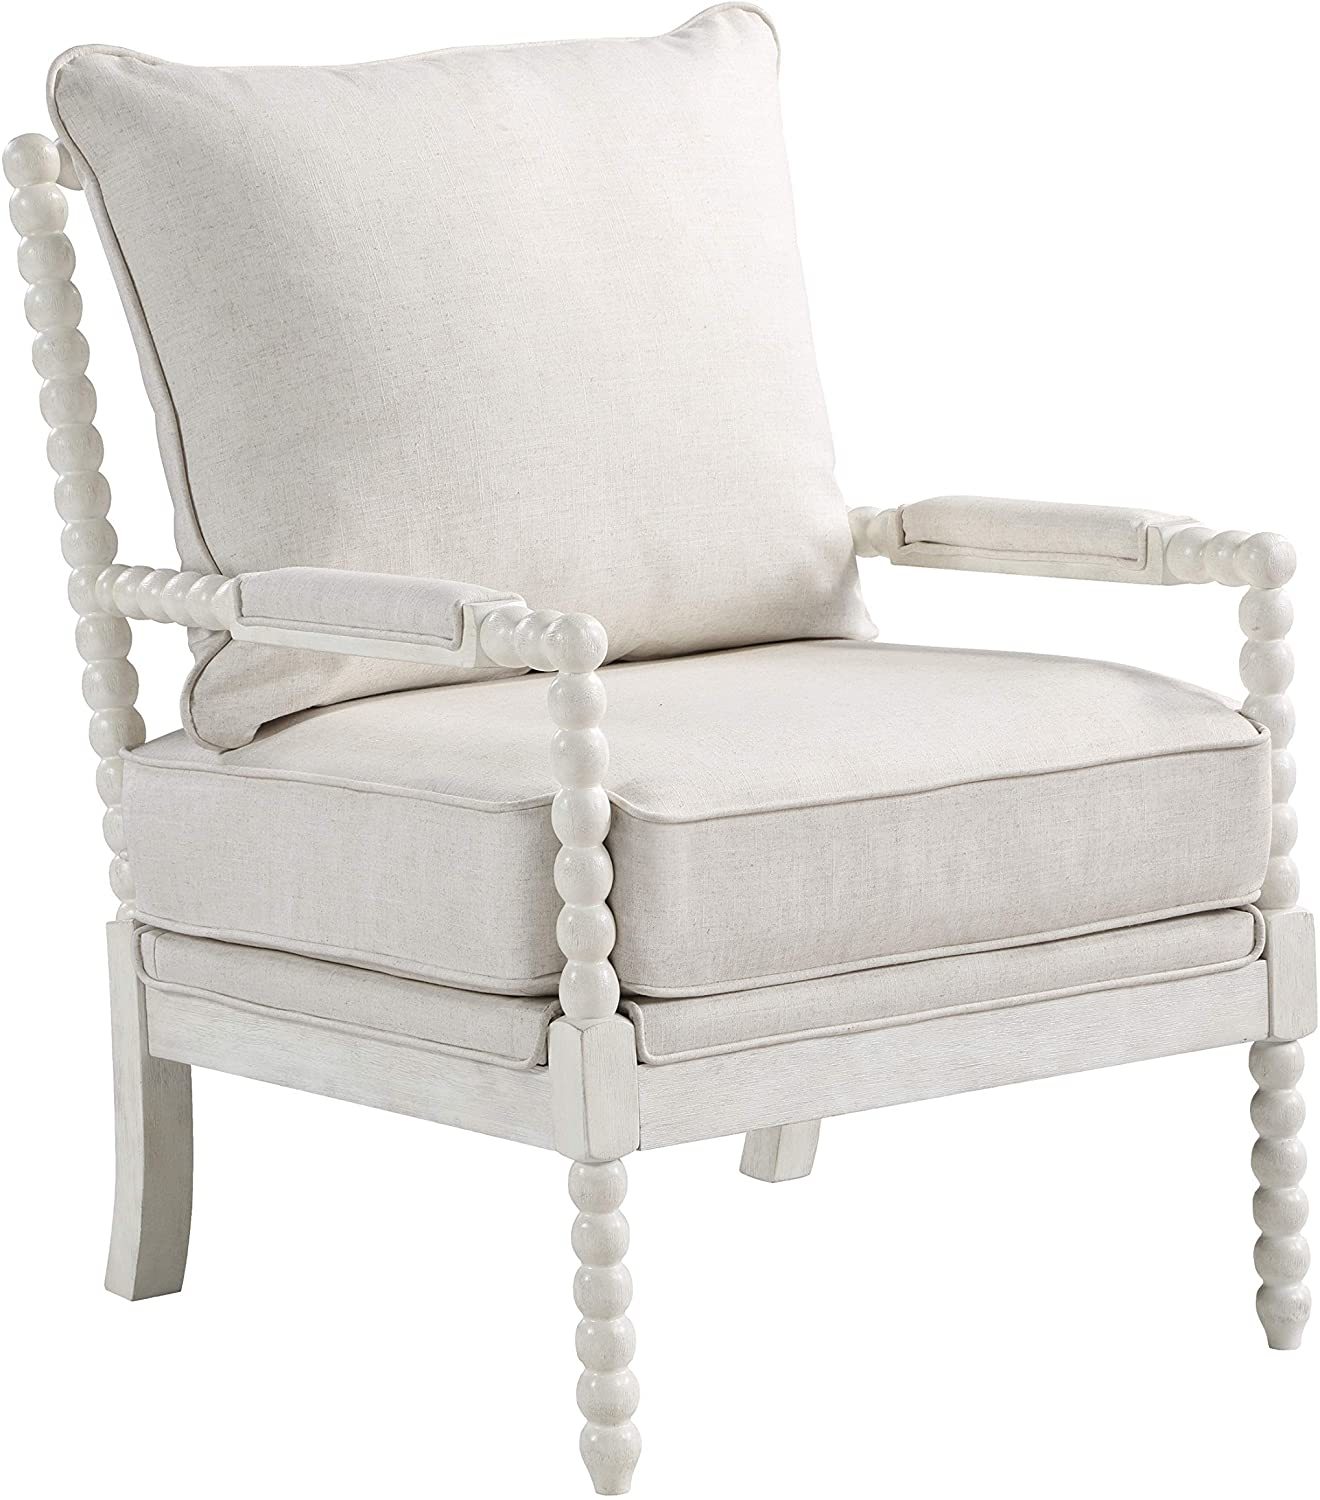 OSP Home Furnishings Kaylee Spindle Accent Chair, 26.5” W x 32.25” D x 37” H, - $410.99